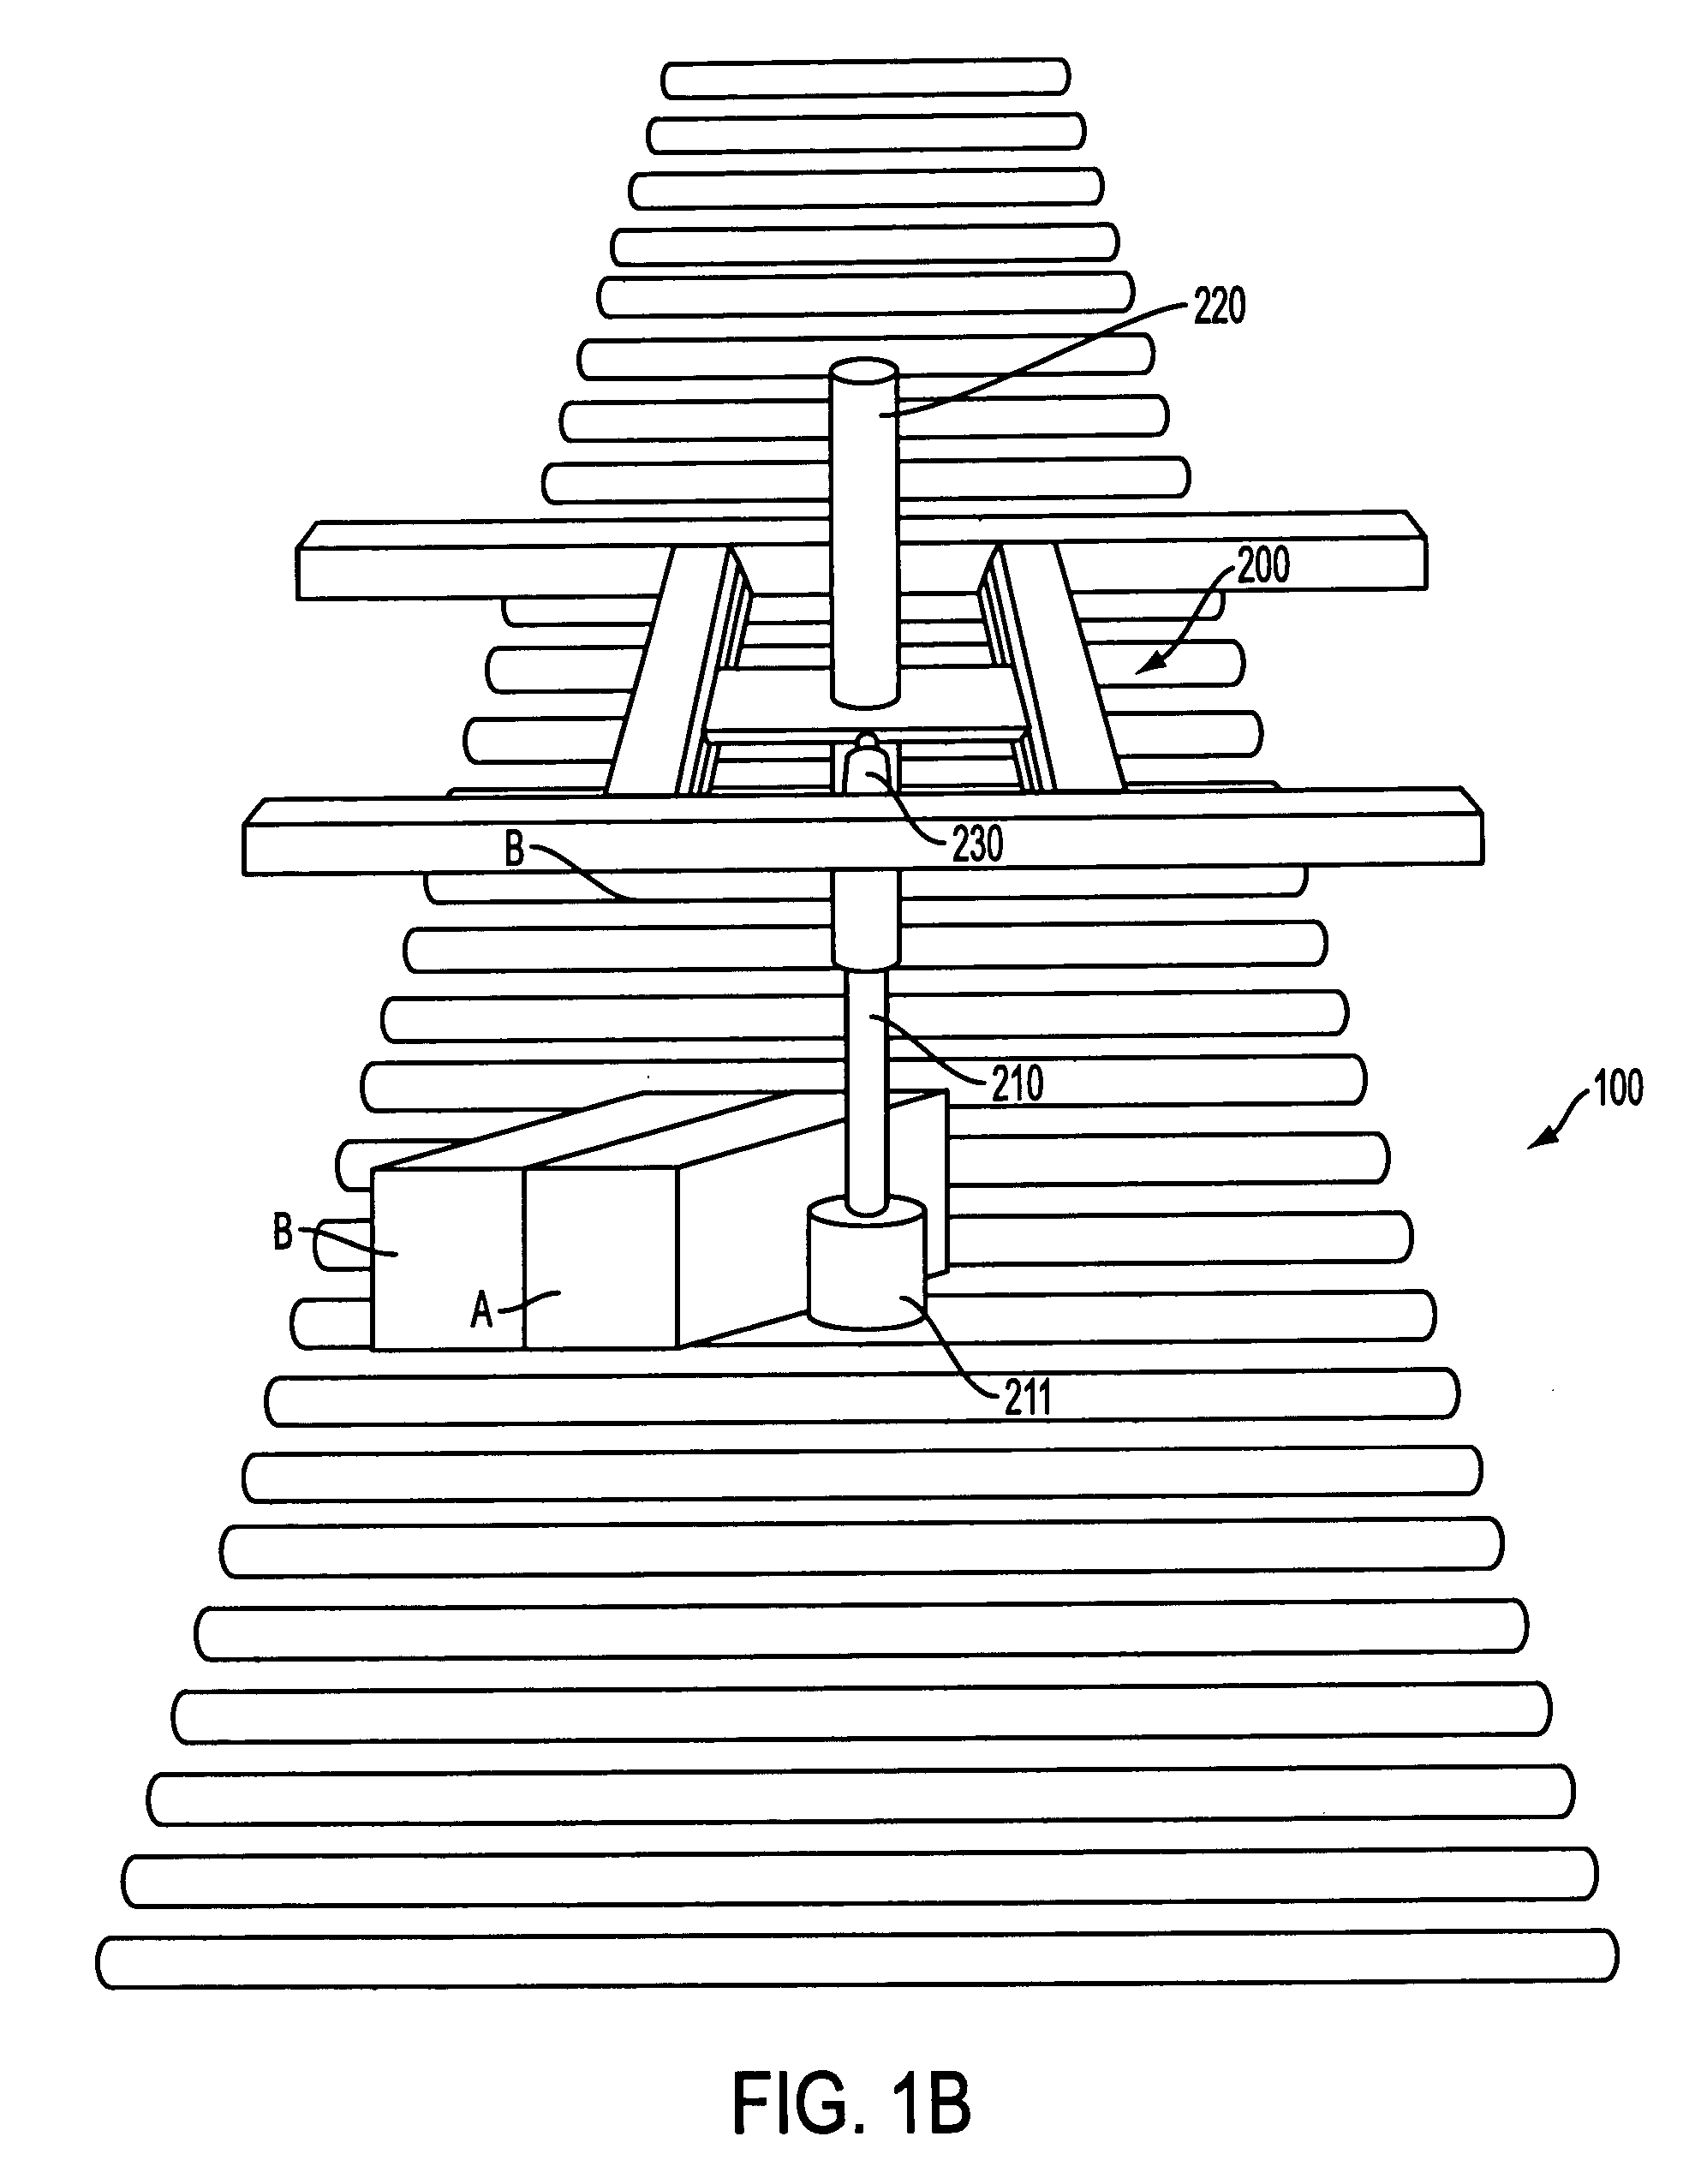 Case turning apparatus and method for a palletizer